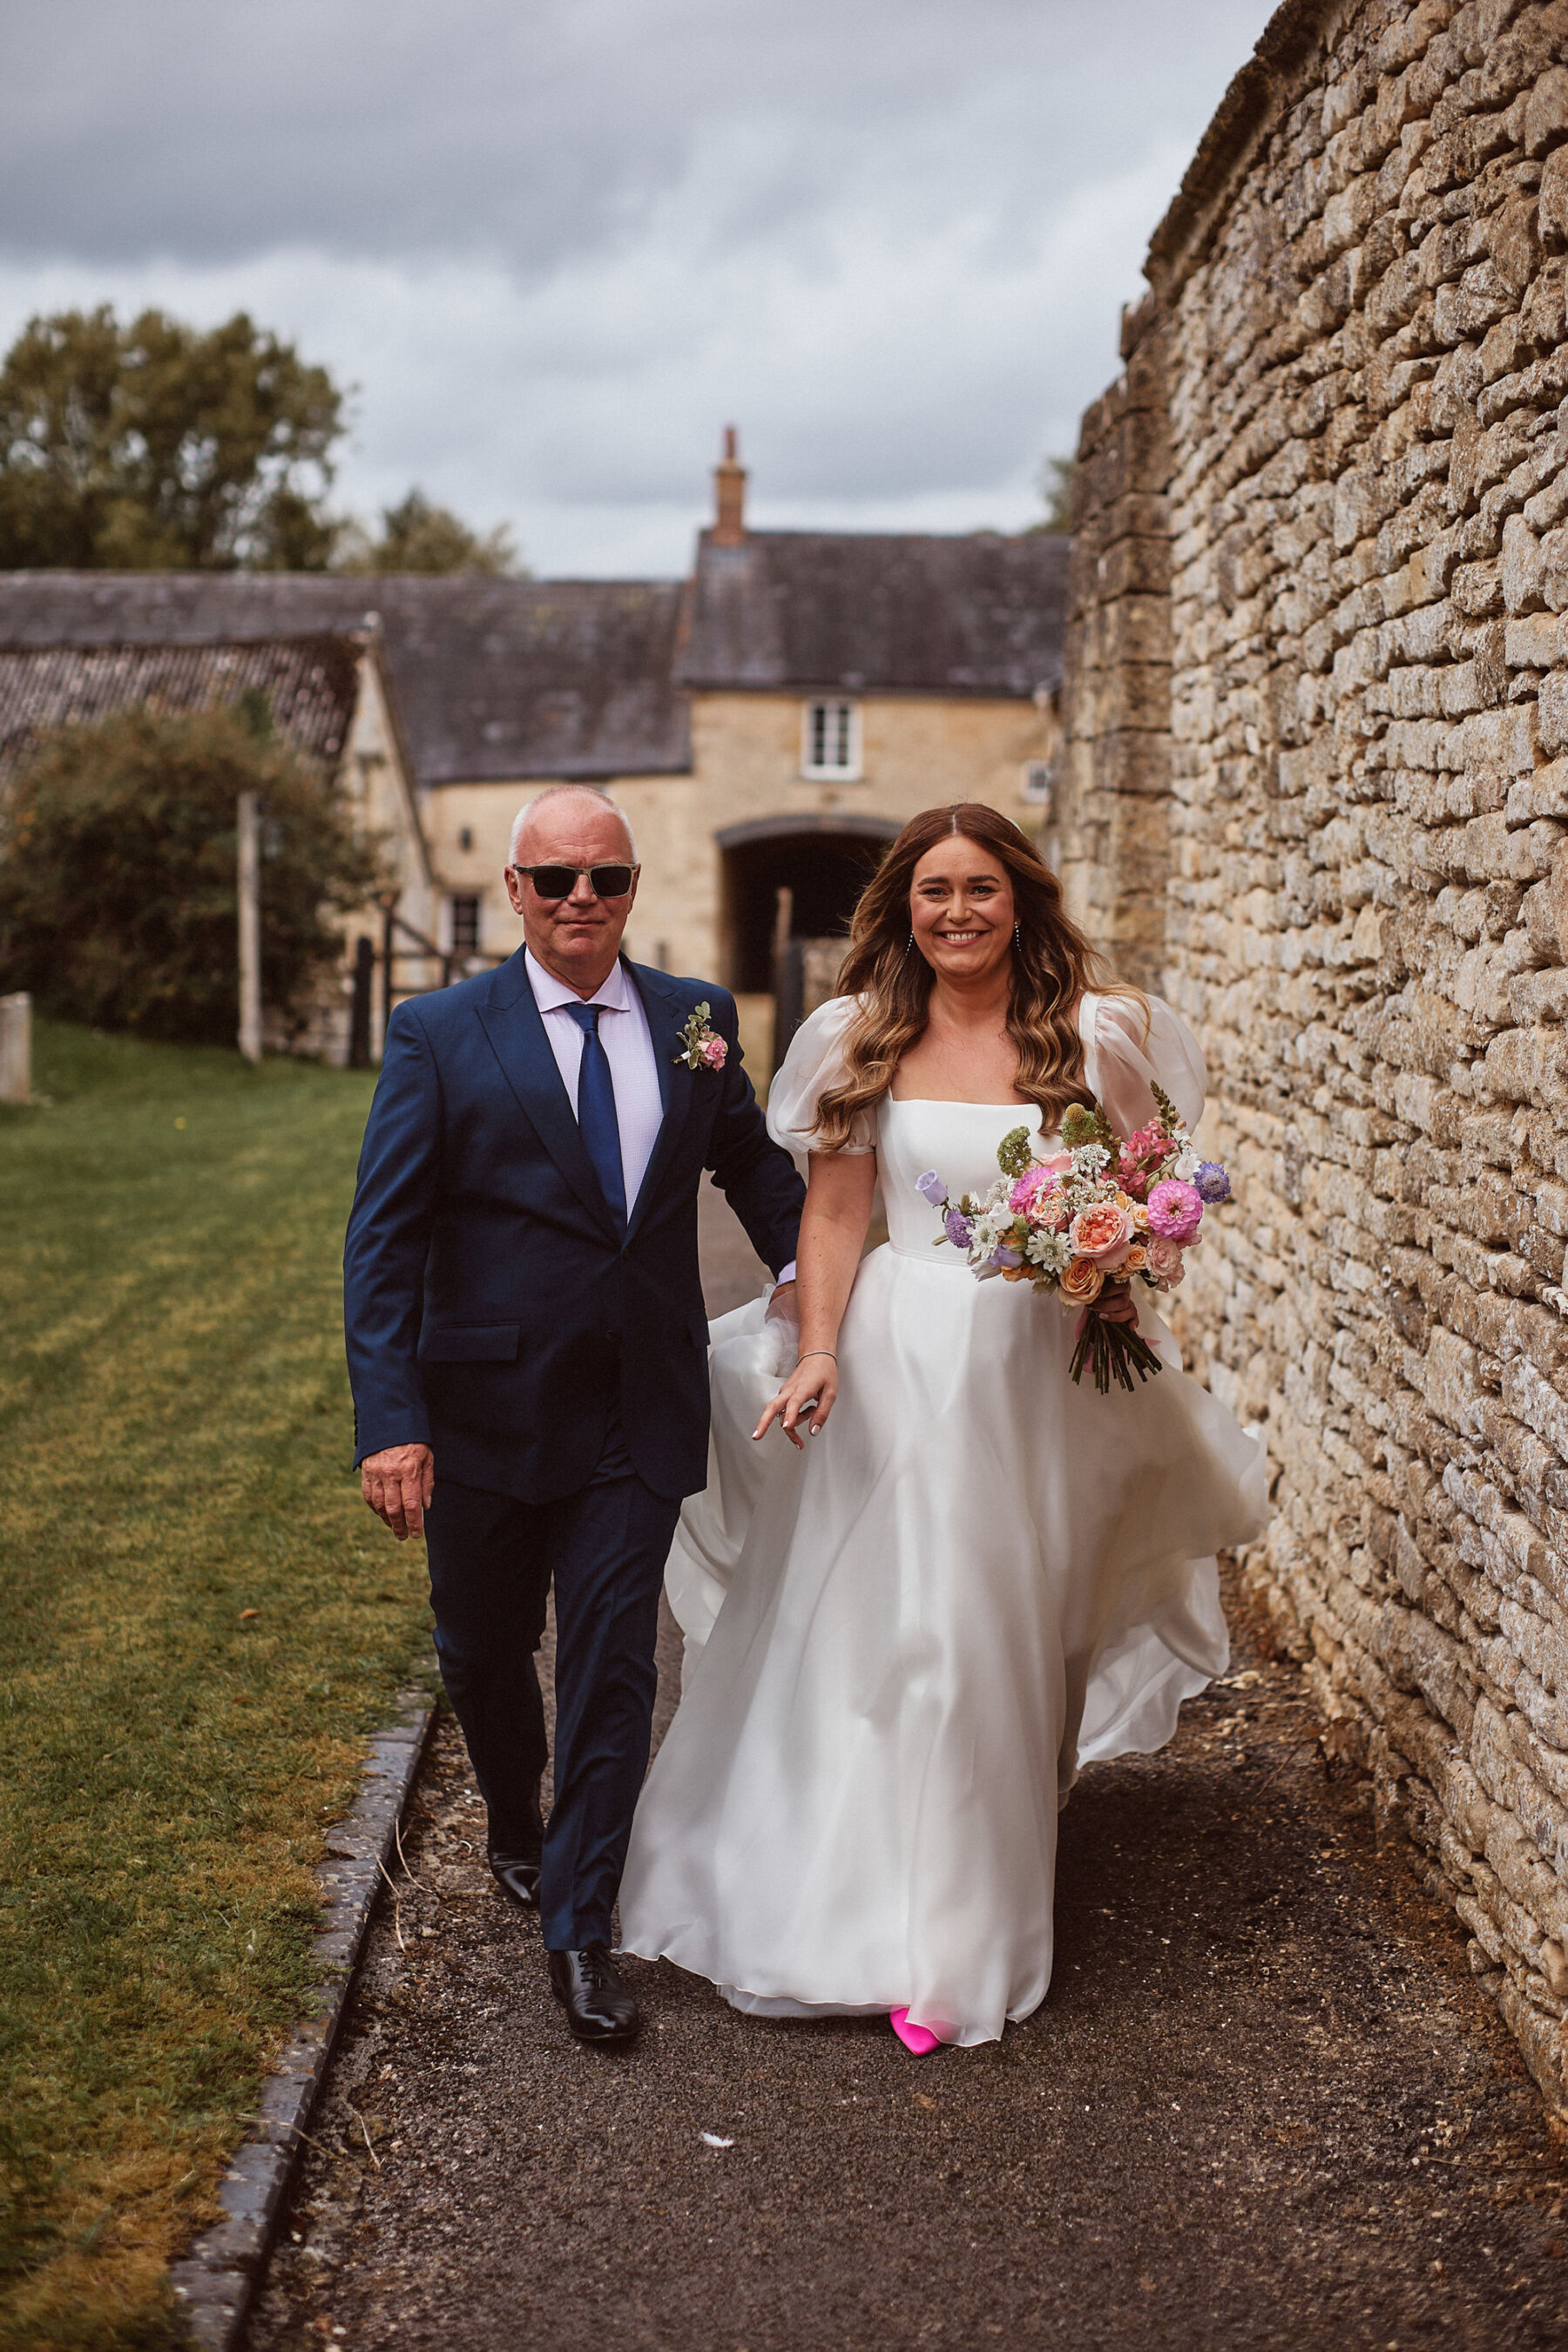 Happy bride with her father, she wears a puff sleeve Suzanne Neville wedding dress and bright pink shoes from New Look. She carries a colourful (pinks & pastels) wedding bouquet.